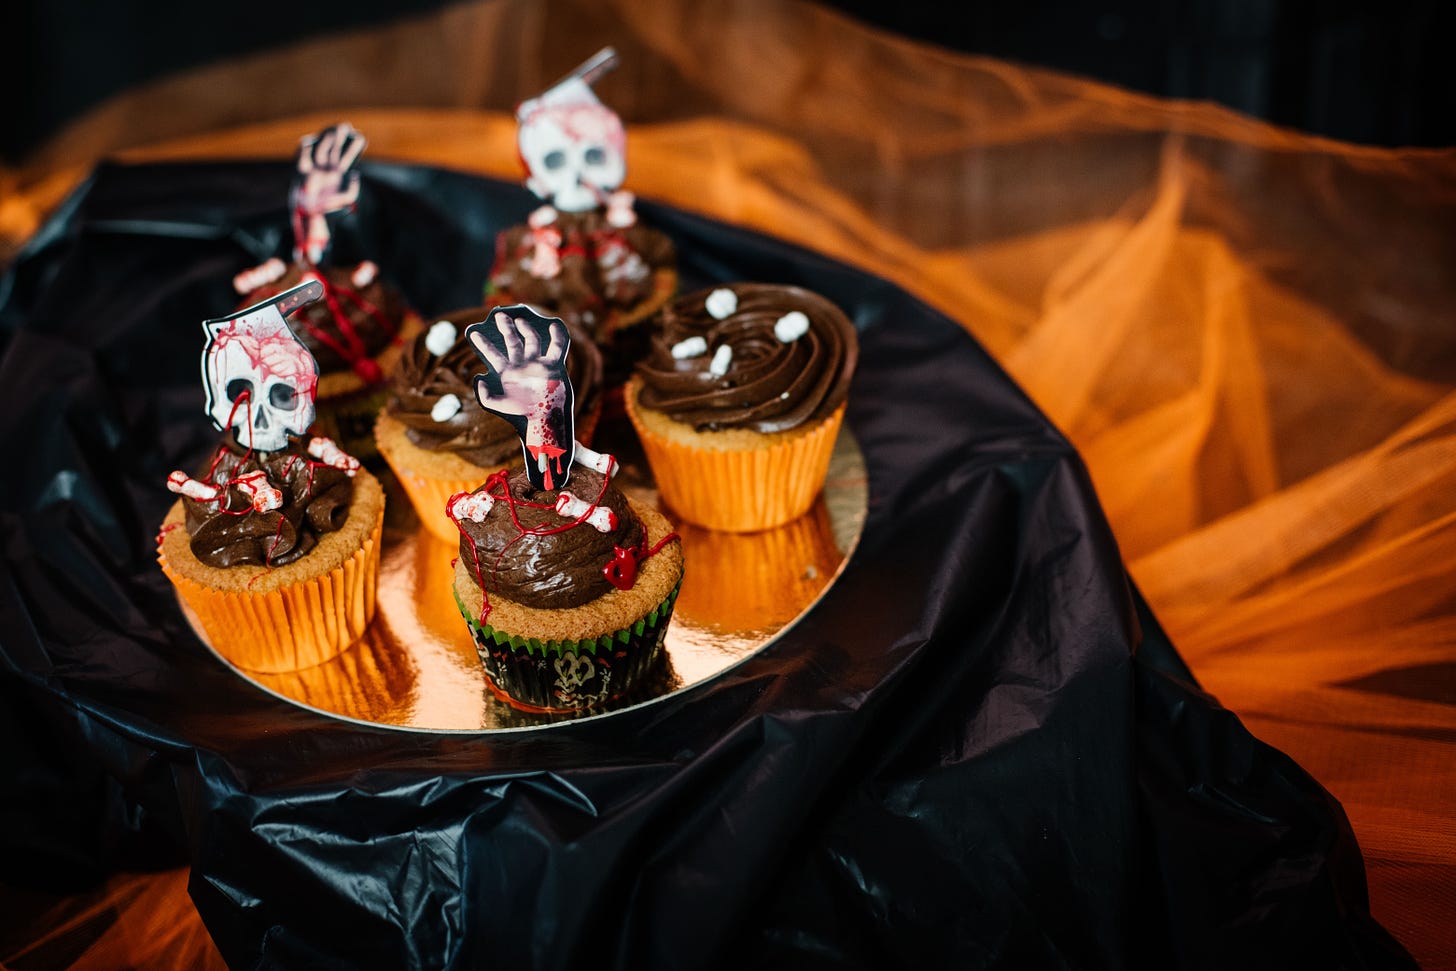 Pumpkin muffins with chocolate frosting dressed up for Halloween